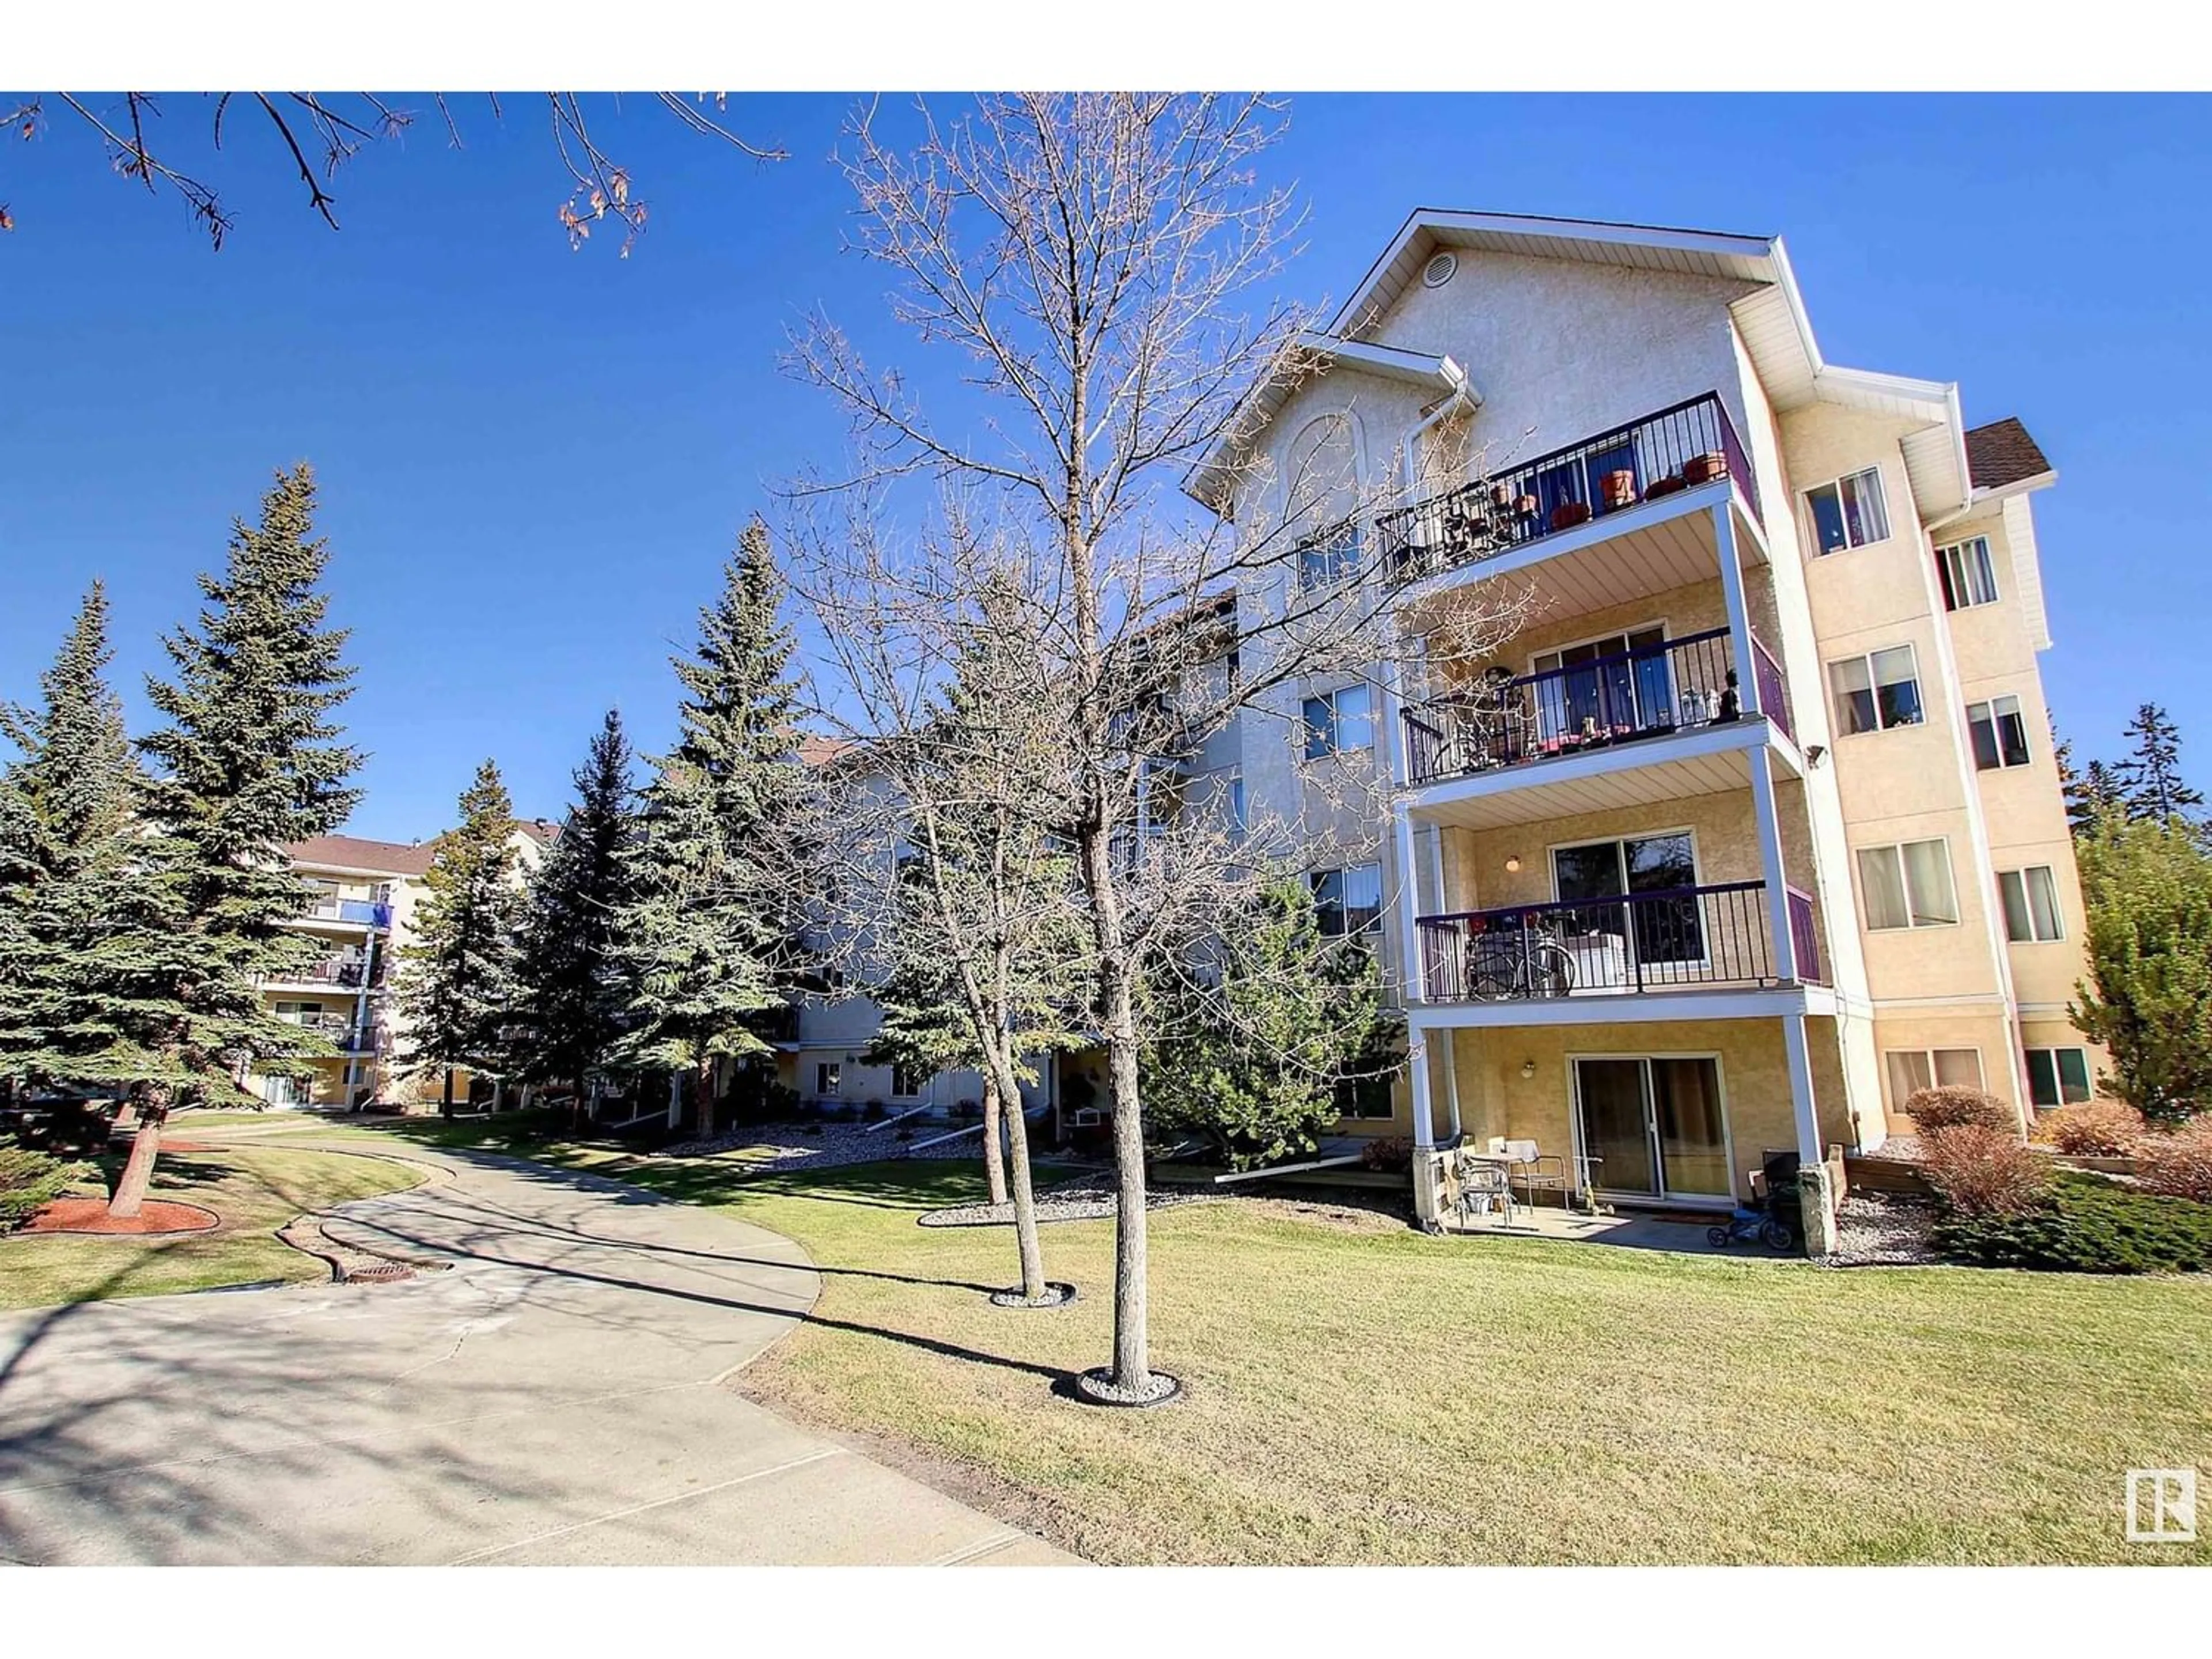 A pic from exterior of the house or condo for #116 10636 120 ST NW, Edmonton Alberta T5H4L5